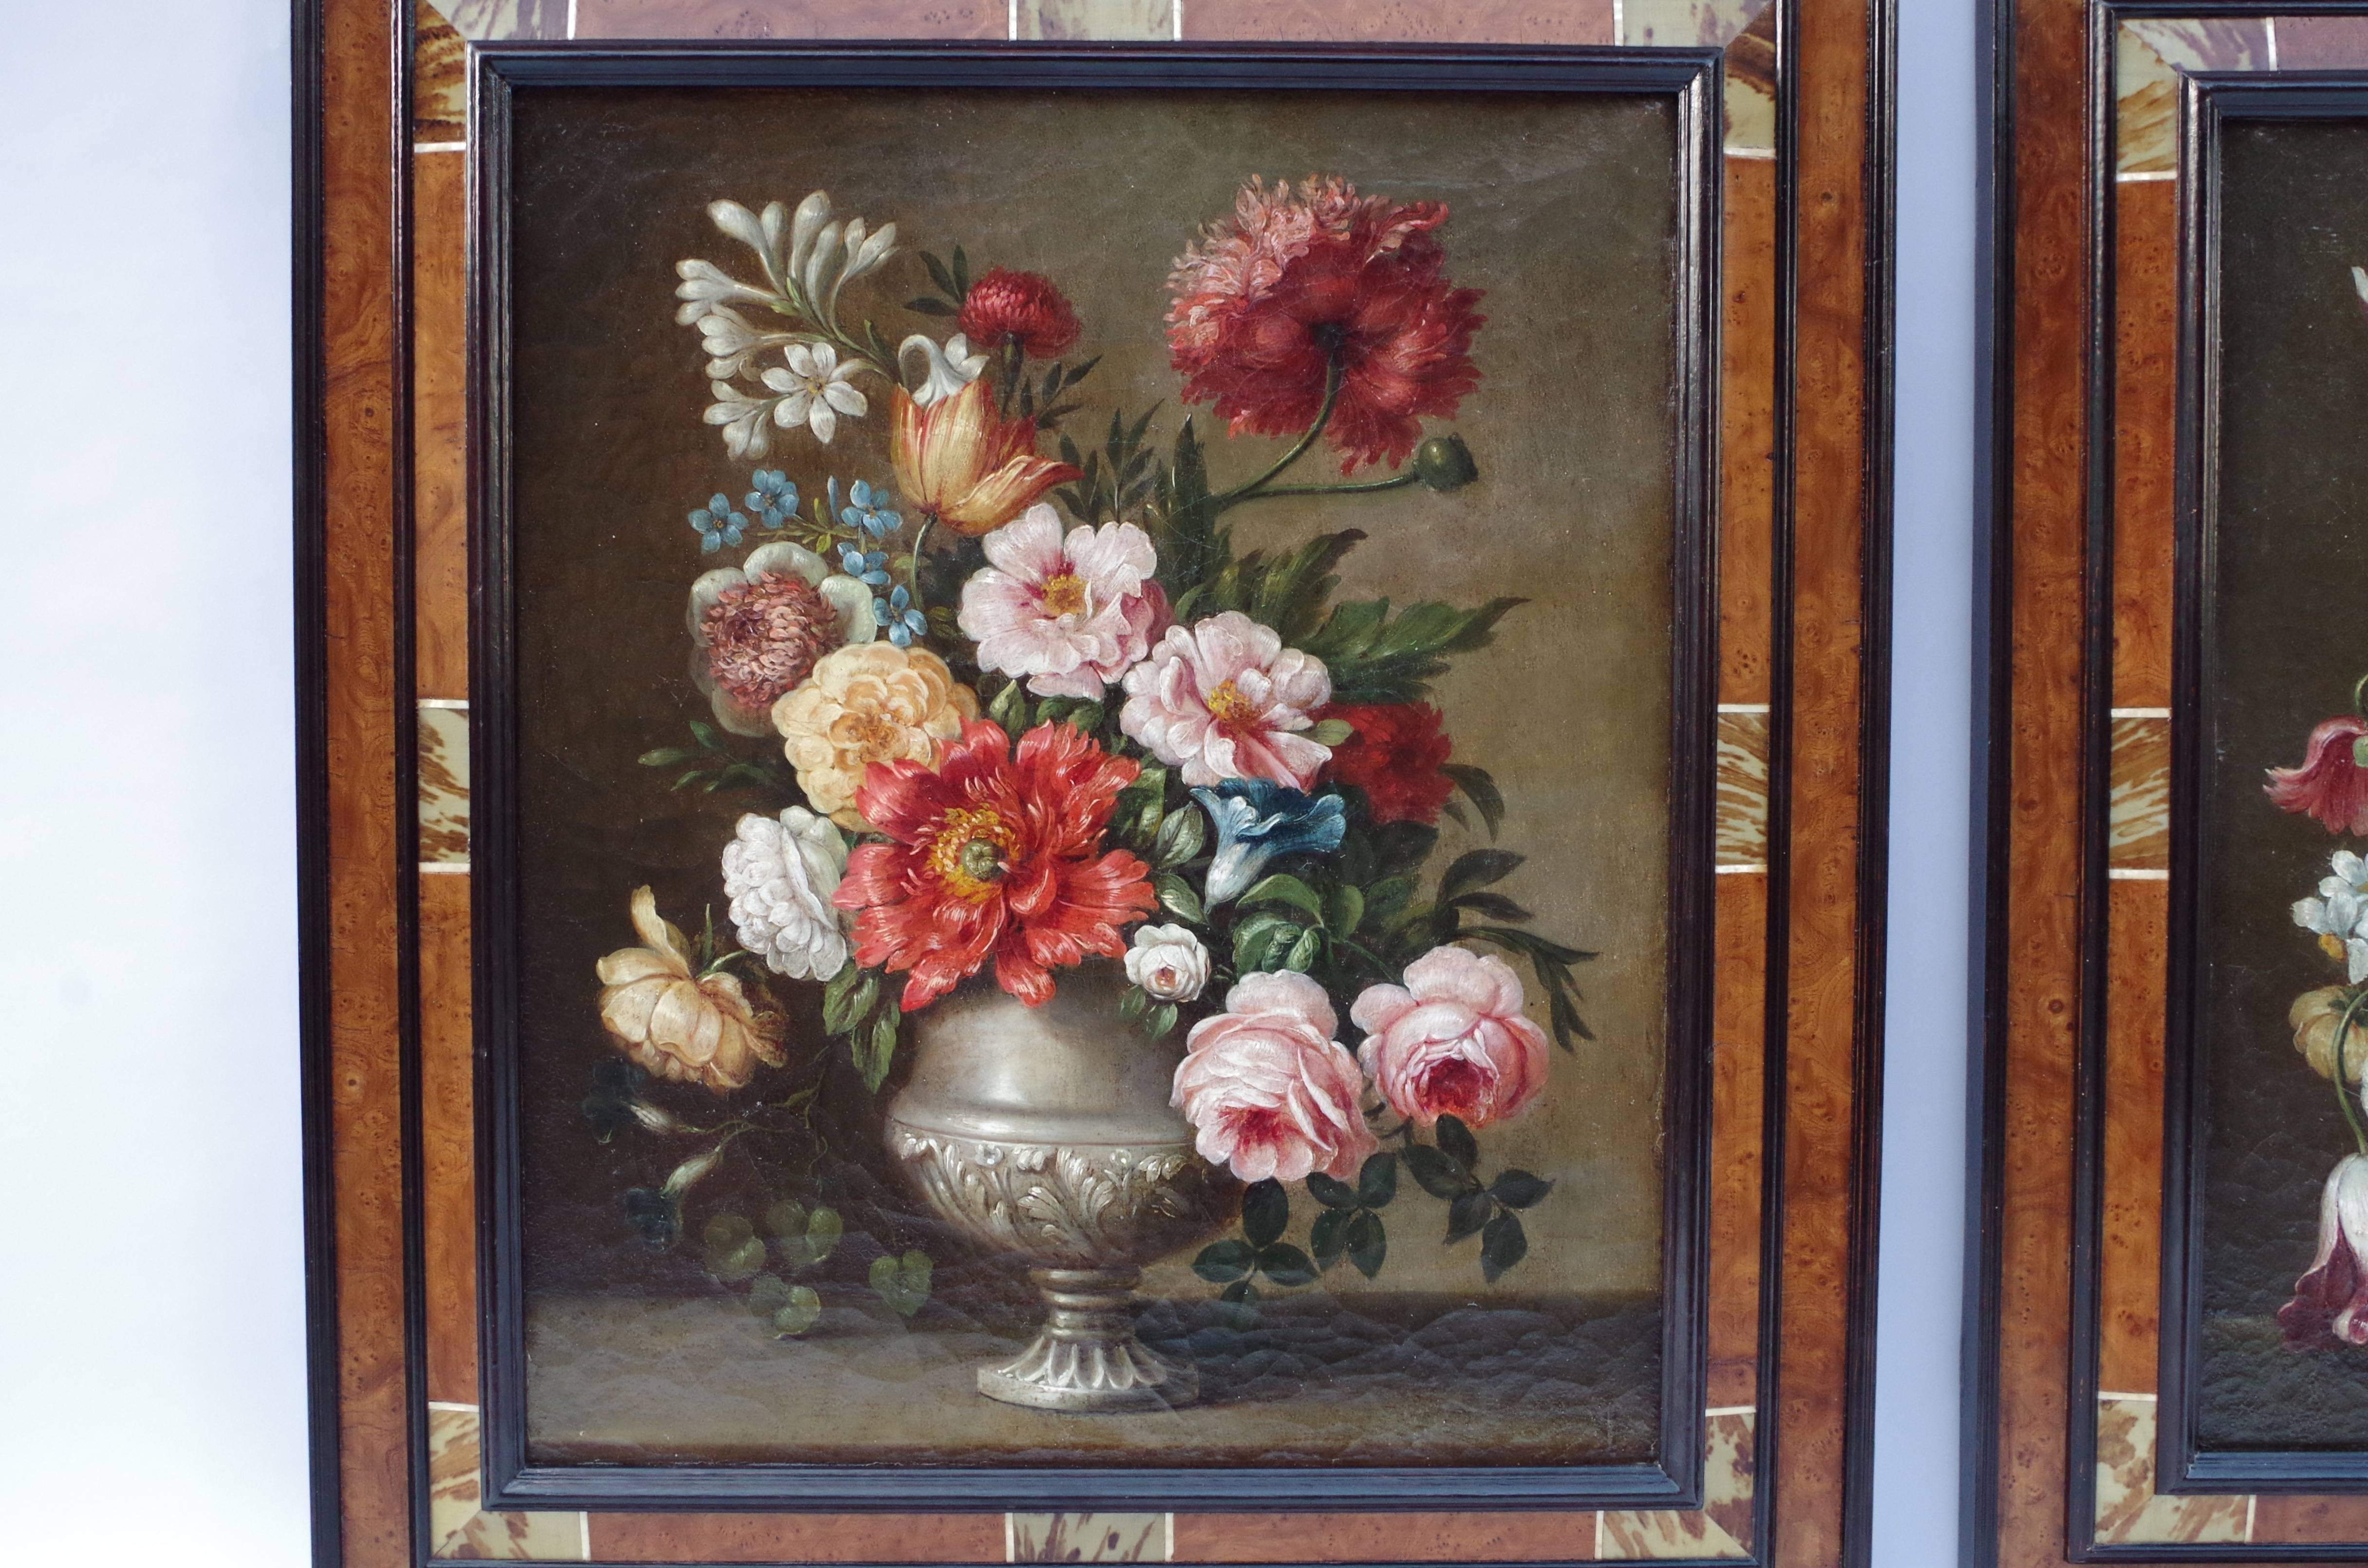 Pair of oils on canvas with their original stretcher representing flowers bouquets composed of peonies, carnation, roses and tulips in 17th century Dutch style.

Frame in wood marquetry.

Work from the late 19th century.

Dimensions without frame